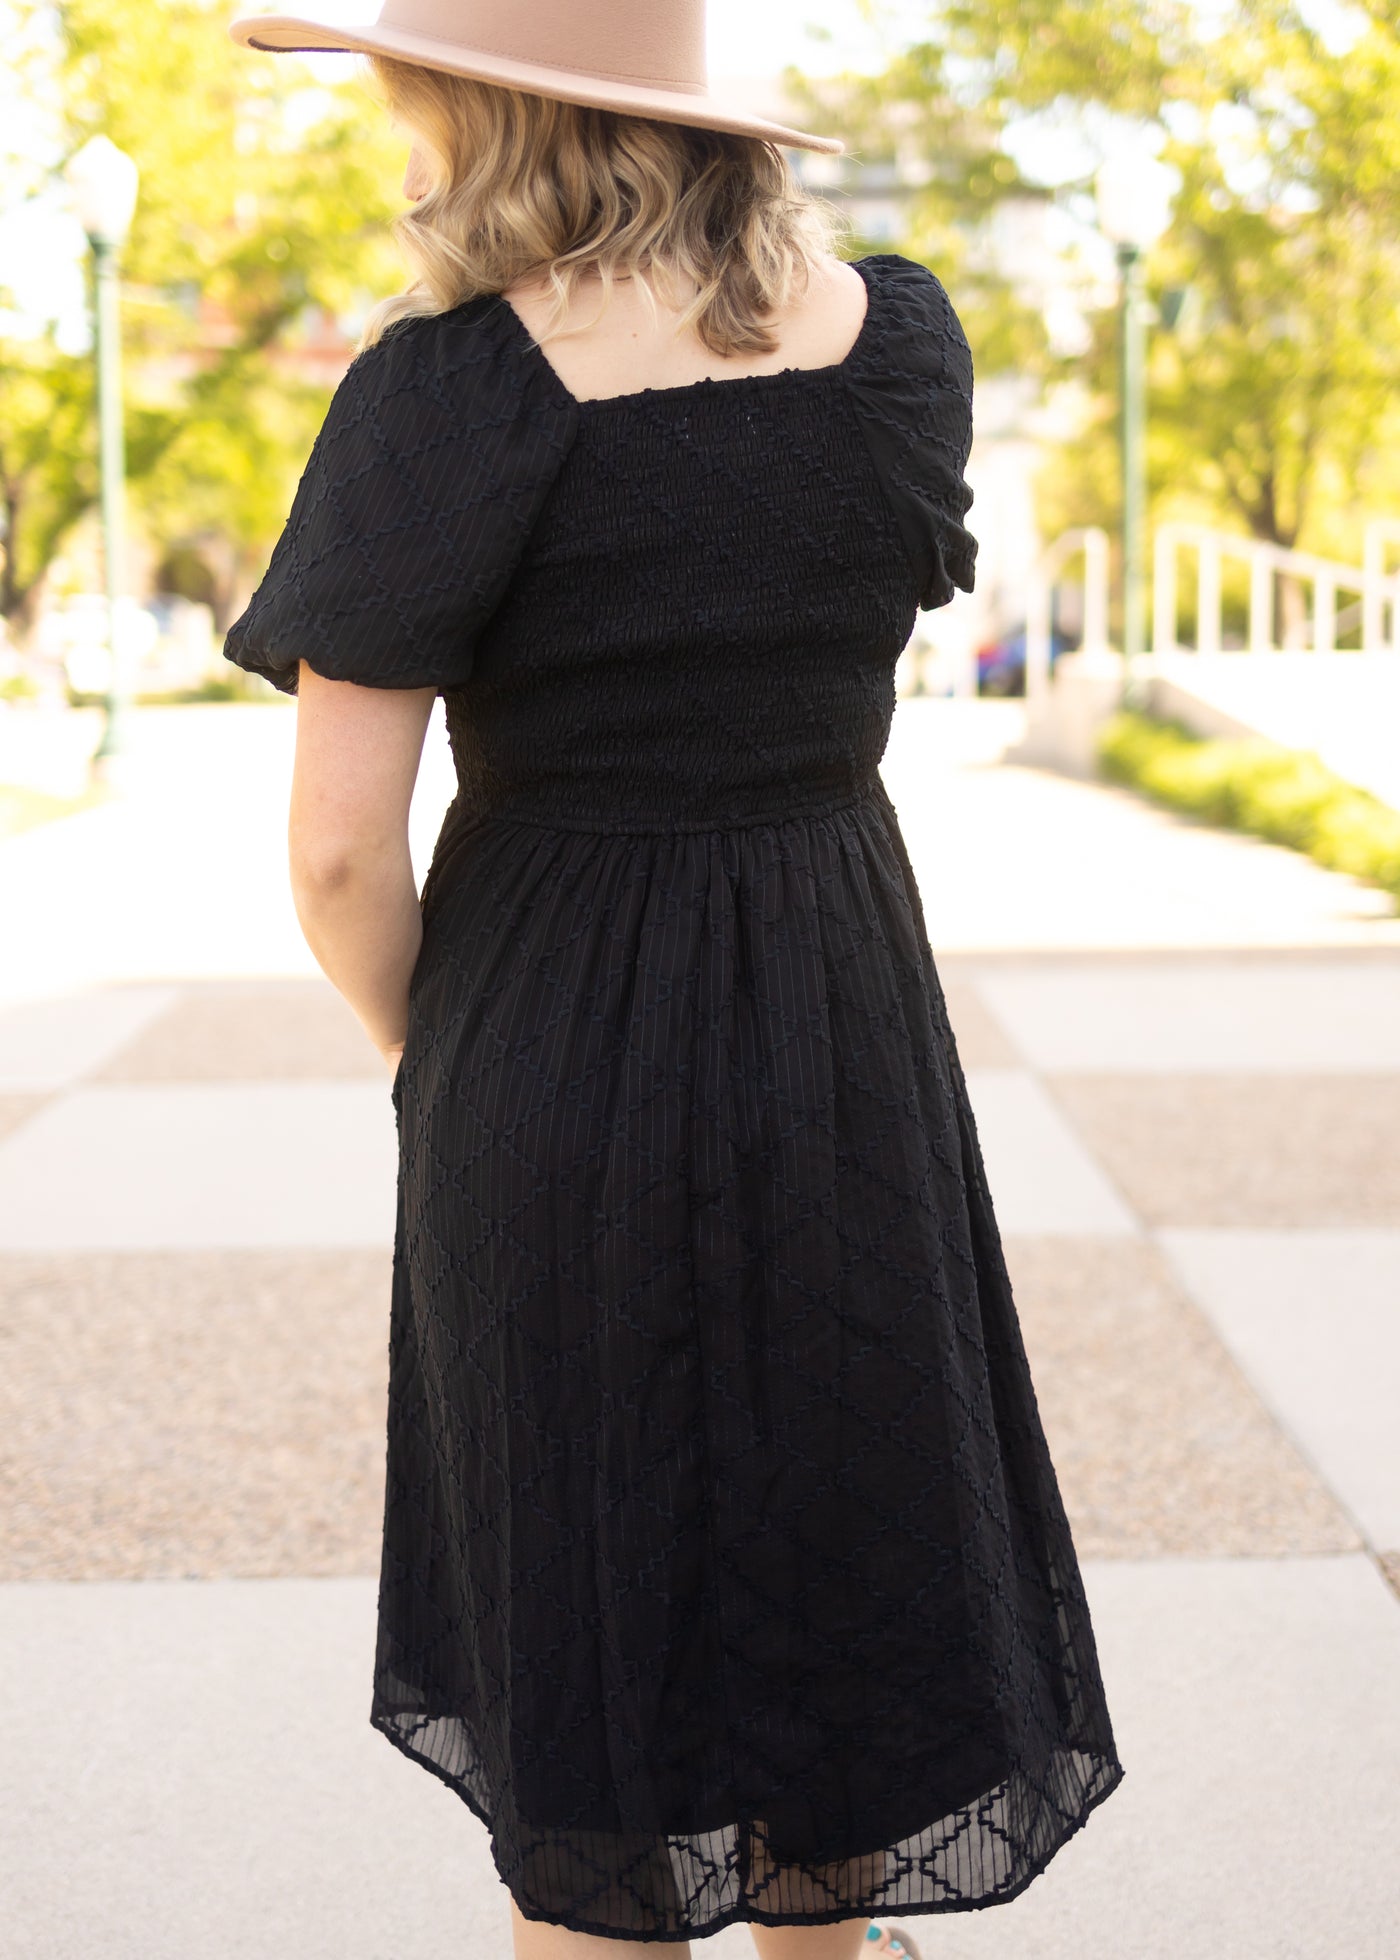 Back view of a short sleeve black dress with smocked bodice